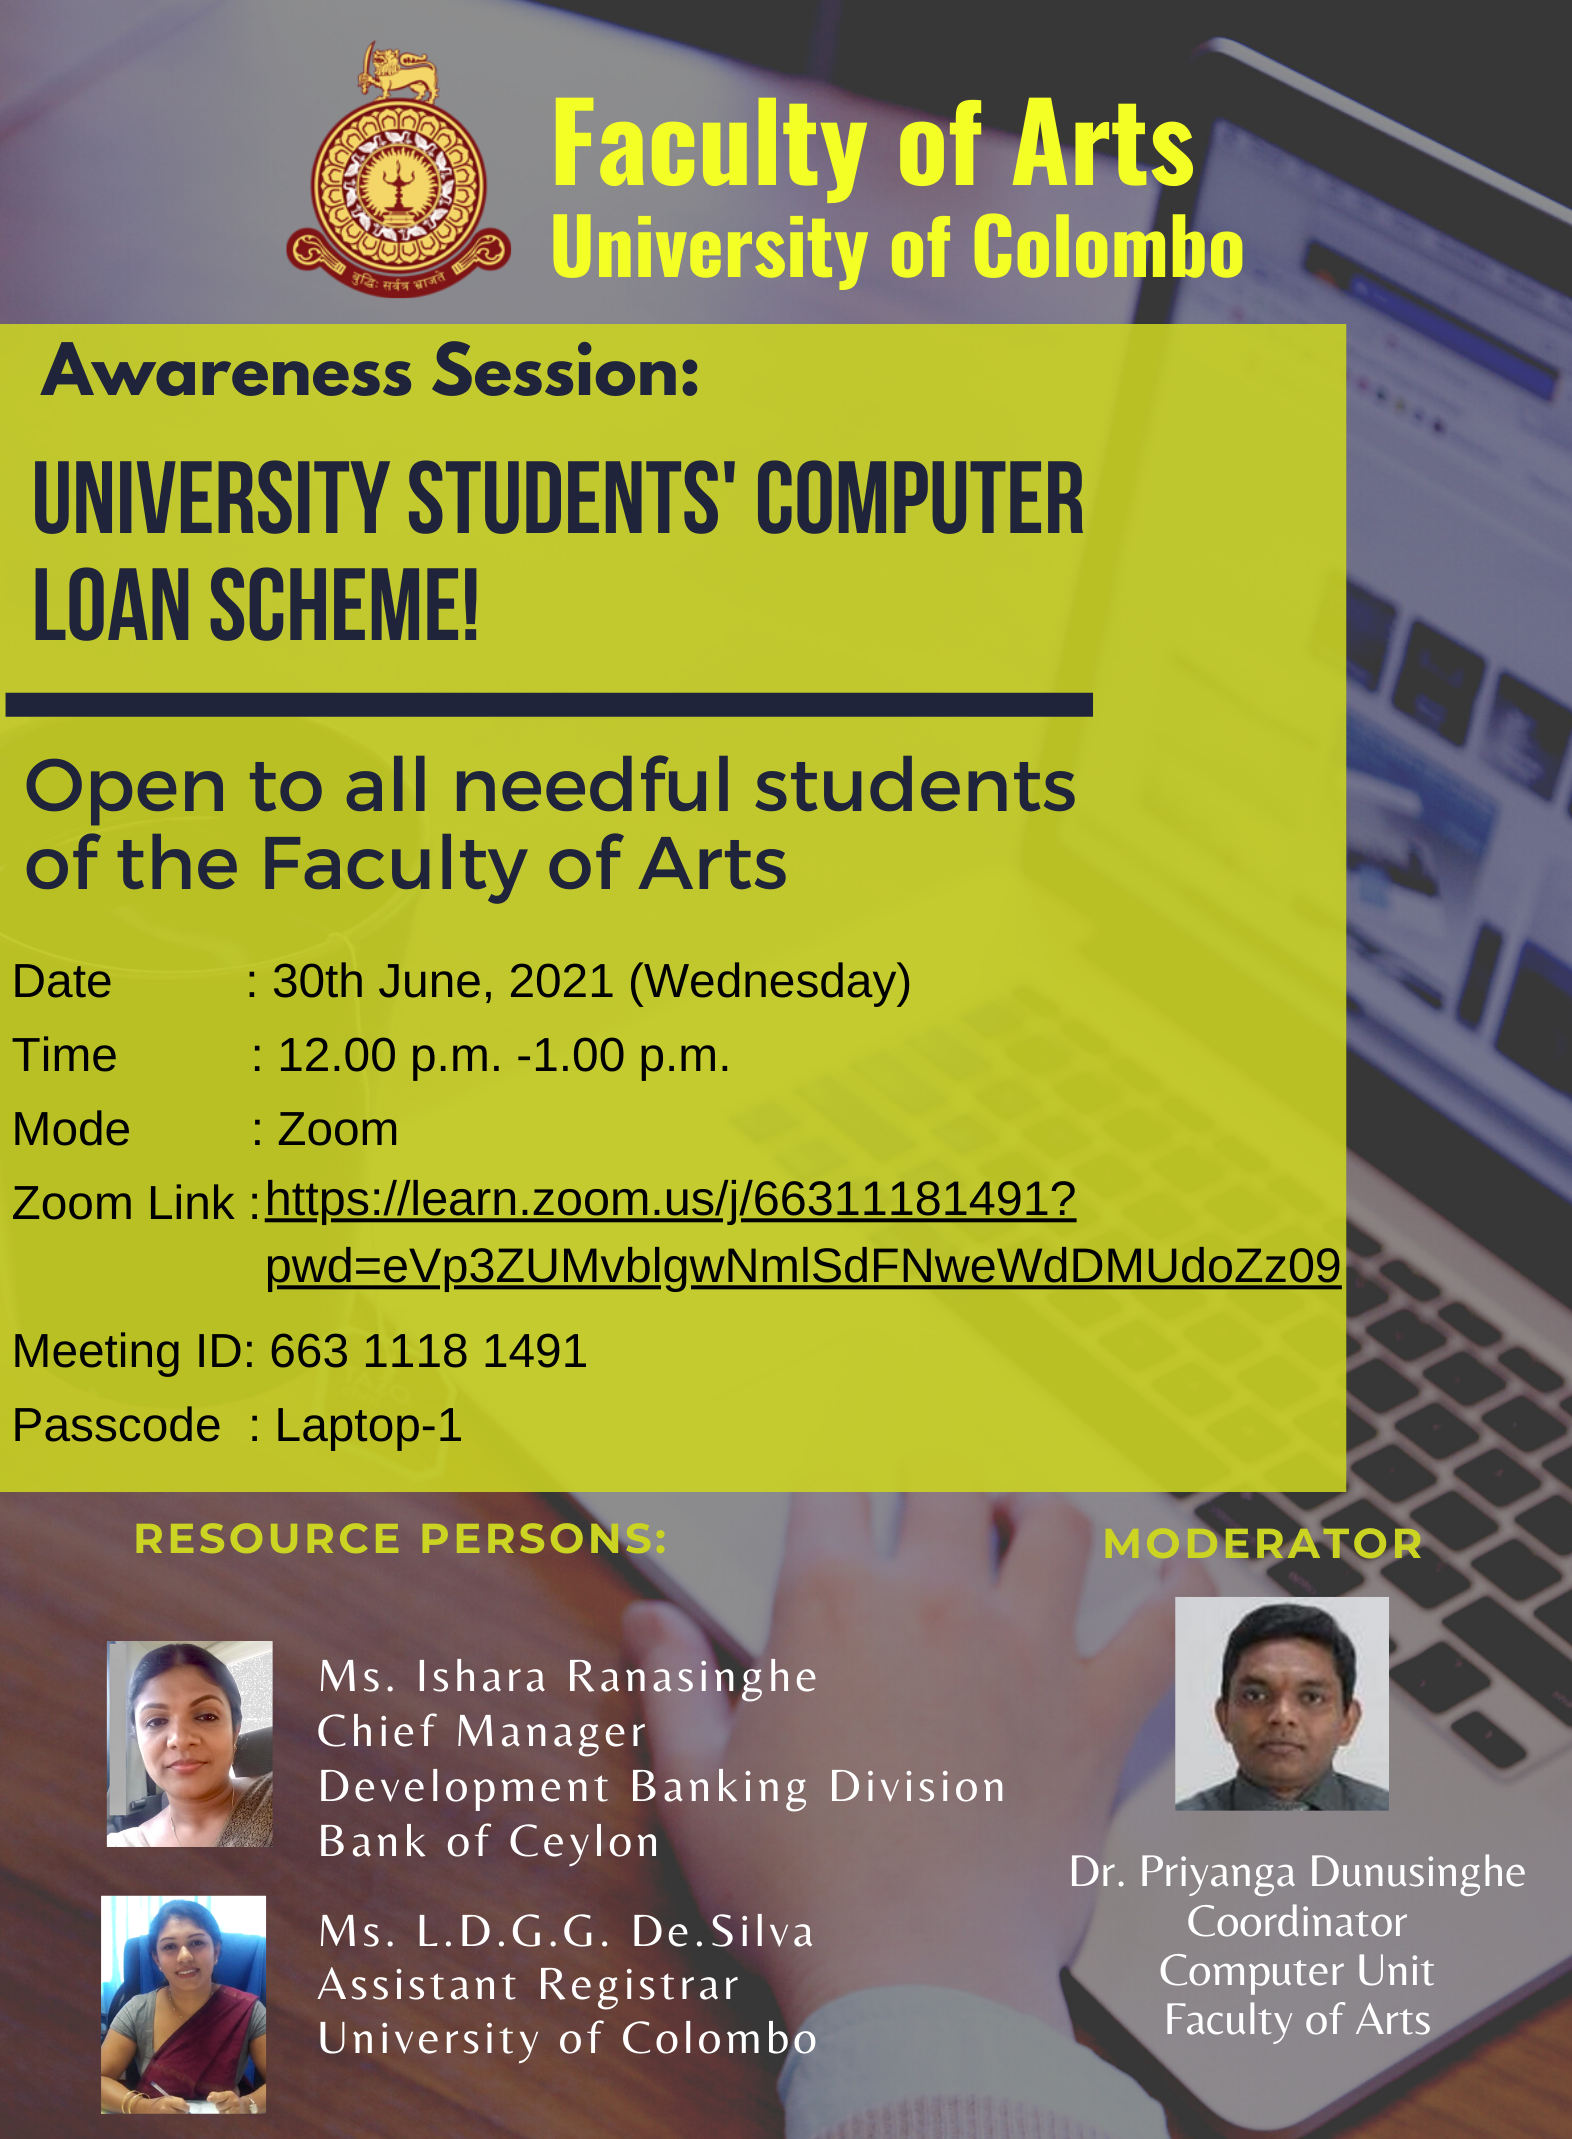 Awareness session on University Students’ Computer Loan Scheme – 30th June